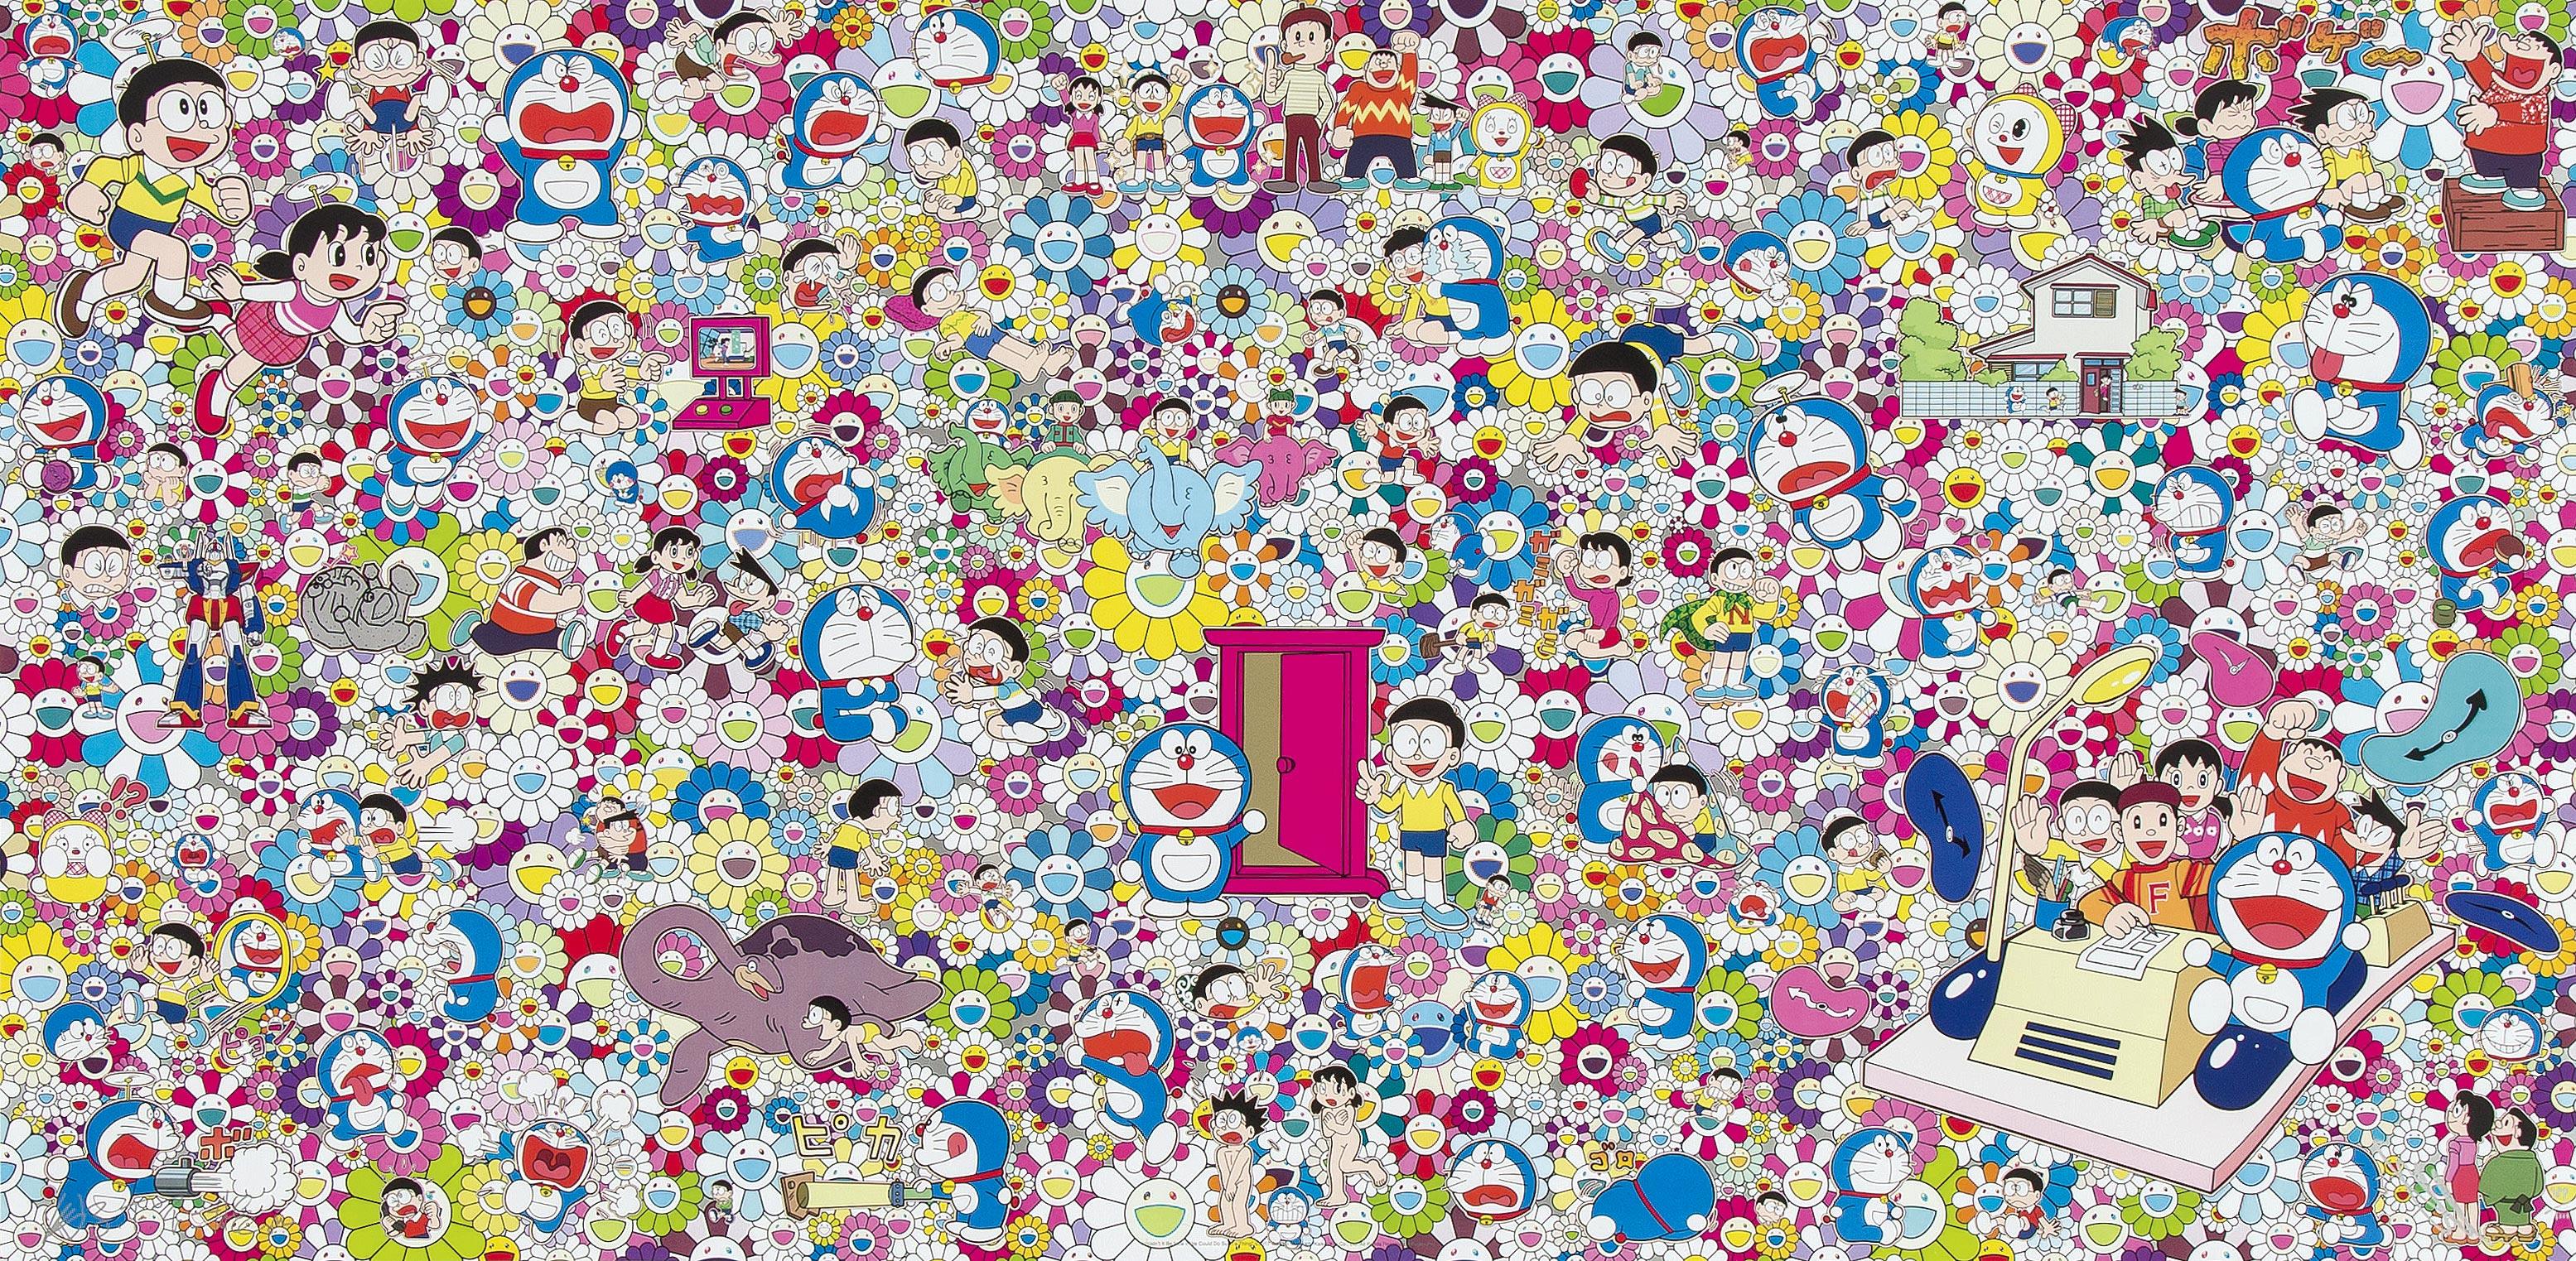 Takashi Murakami Figurative Print - Wouldn't it be nice... Limited Edition (print) by Murakami signed and numbered